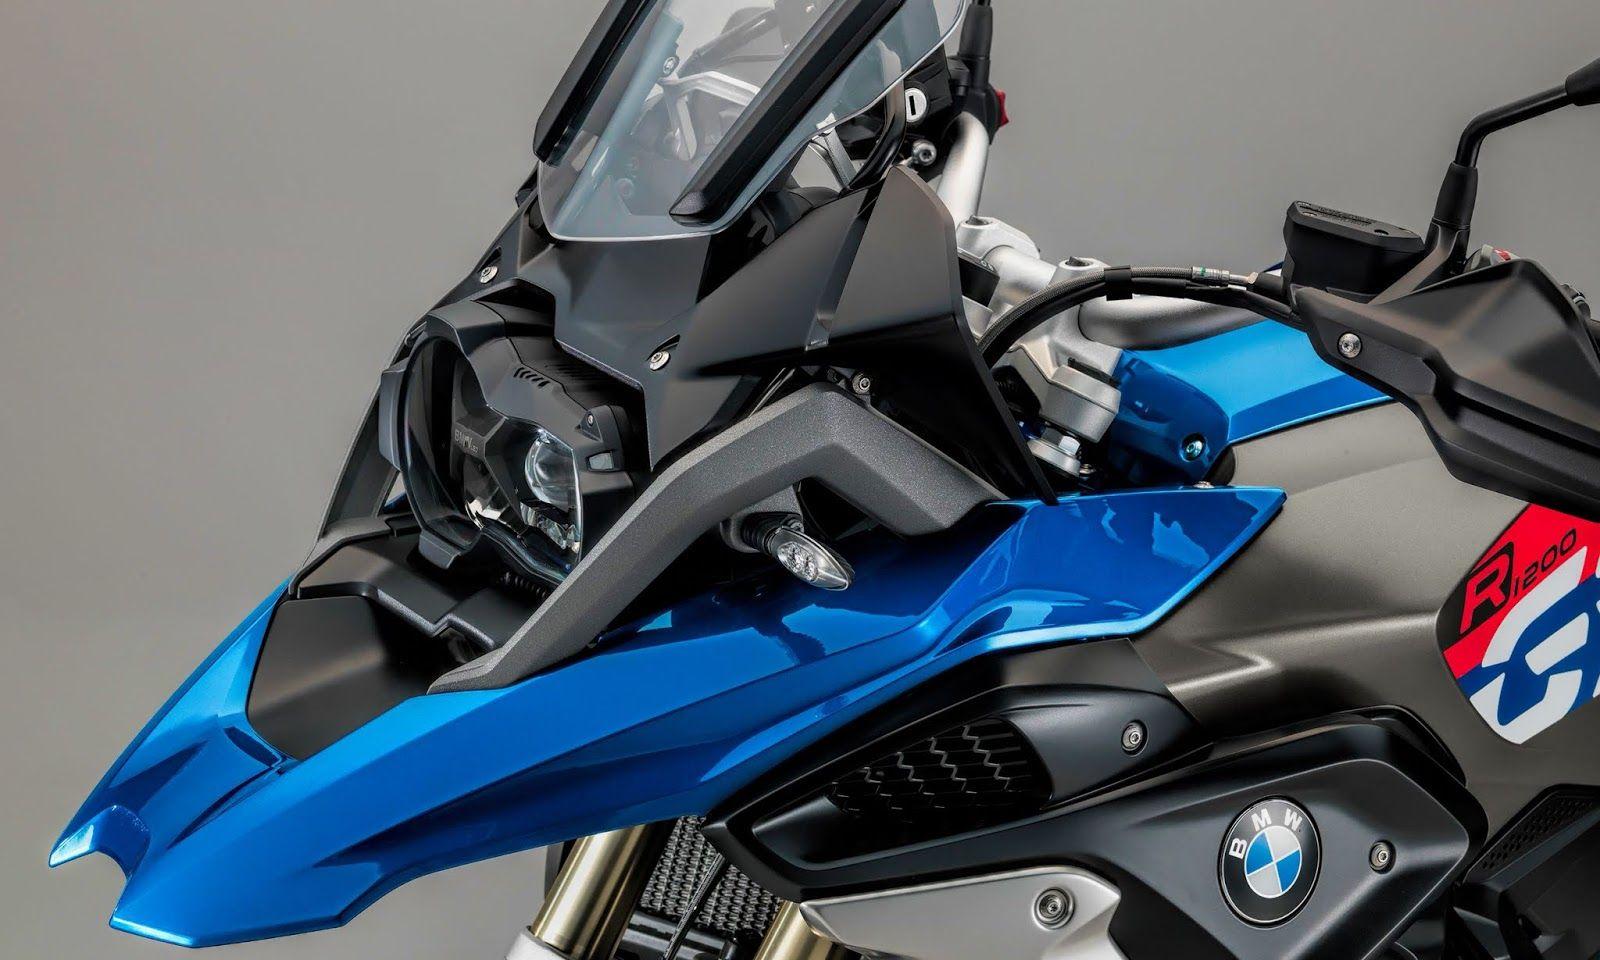 BMW GS 1200 Wallpapers - Top Free BMW GS 1200 Backgrounds - WallpaperAccess